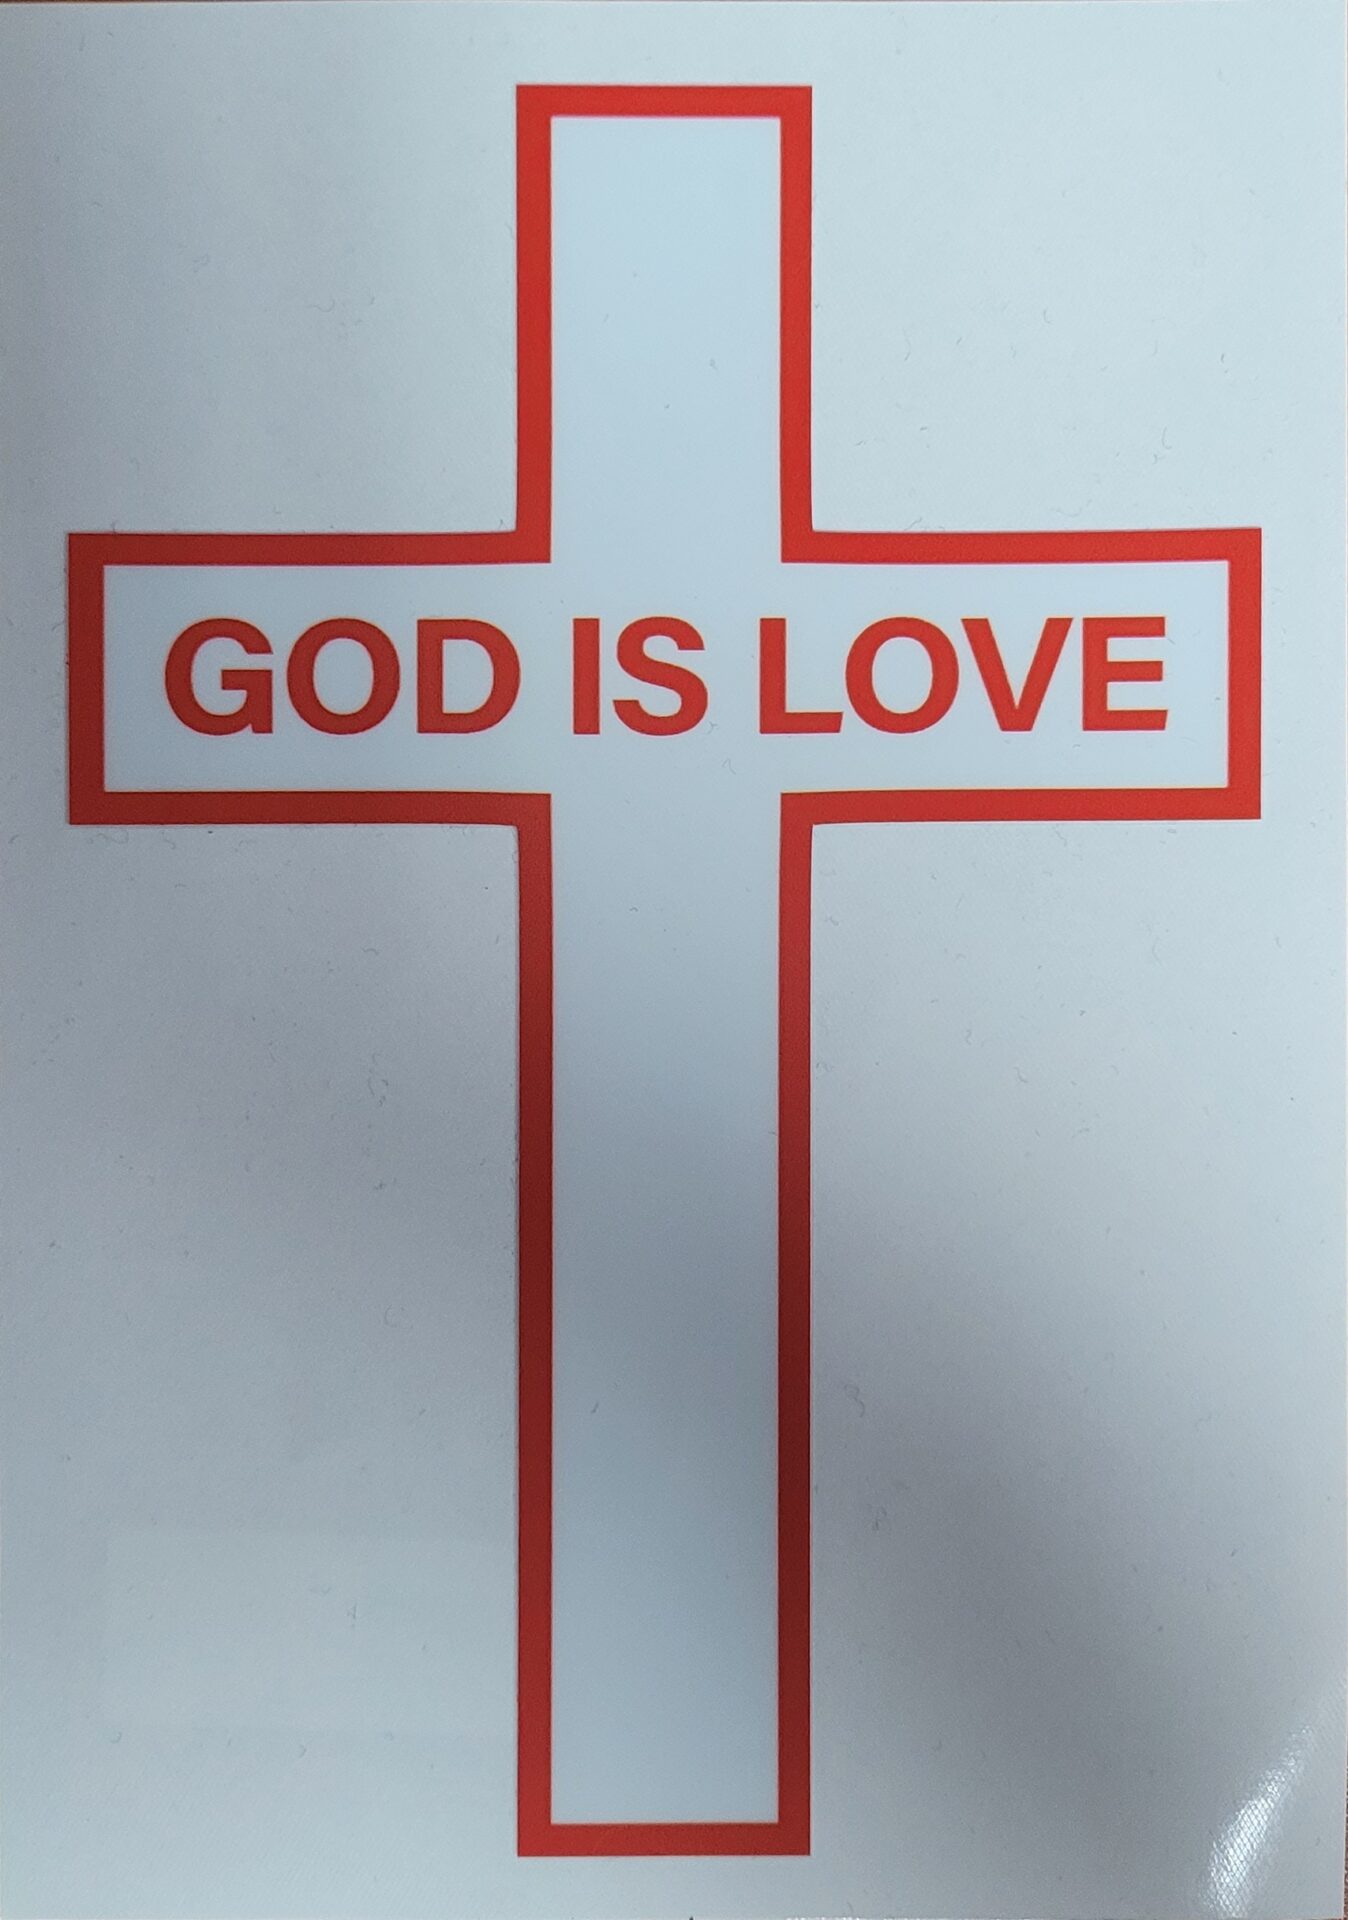 A picture of the red color cross God is love